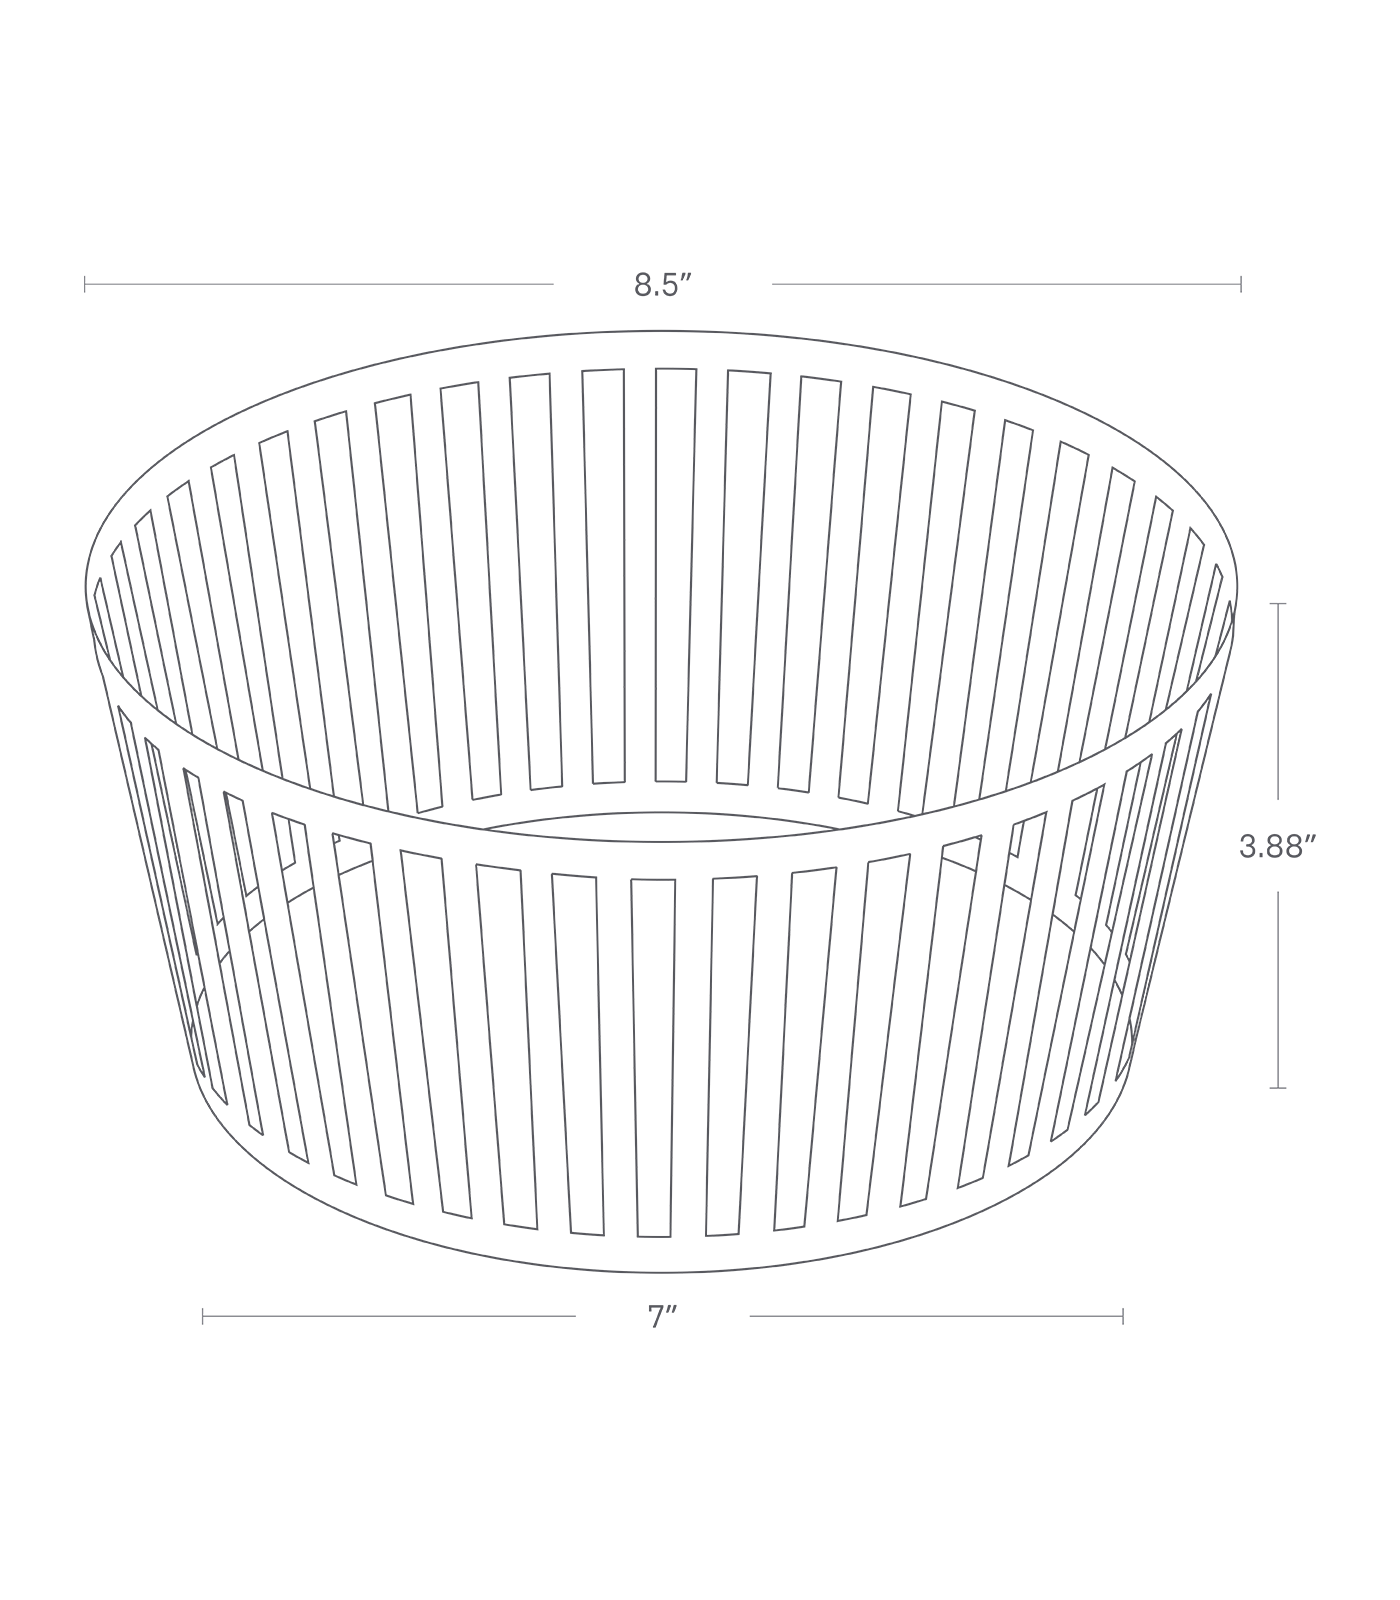 Dimension Image for Fruit Basket on a white background showing a height of 3.88